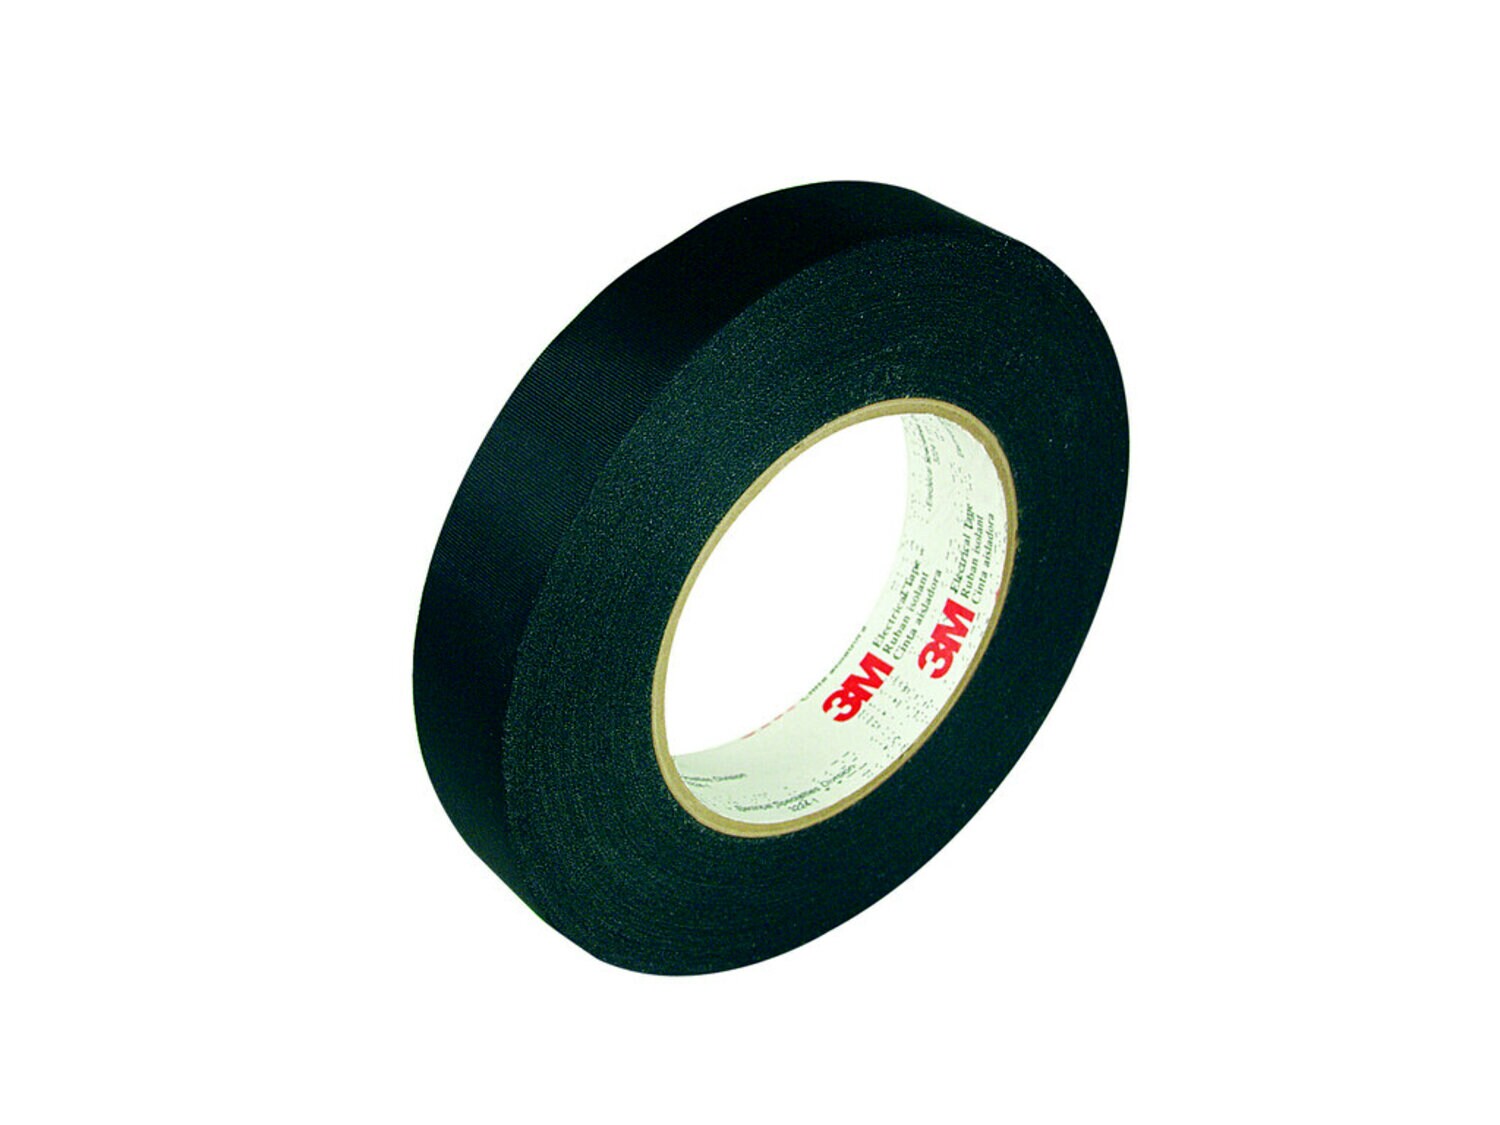 3M 69 Electrical Tape, White, 0.313 x 36 yd.